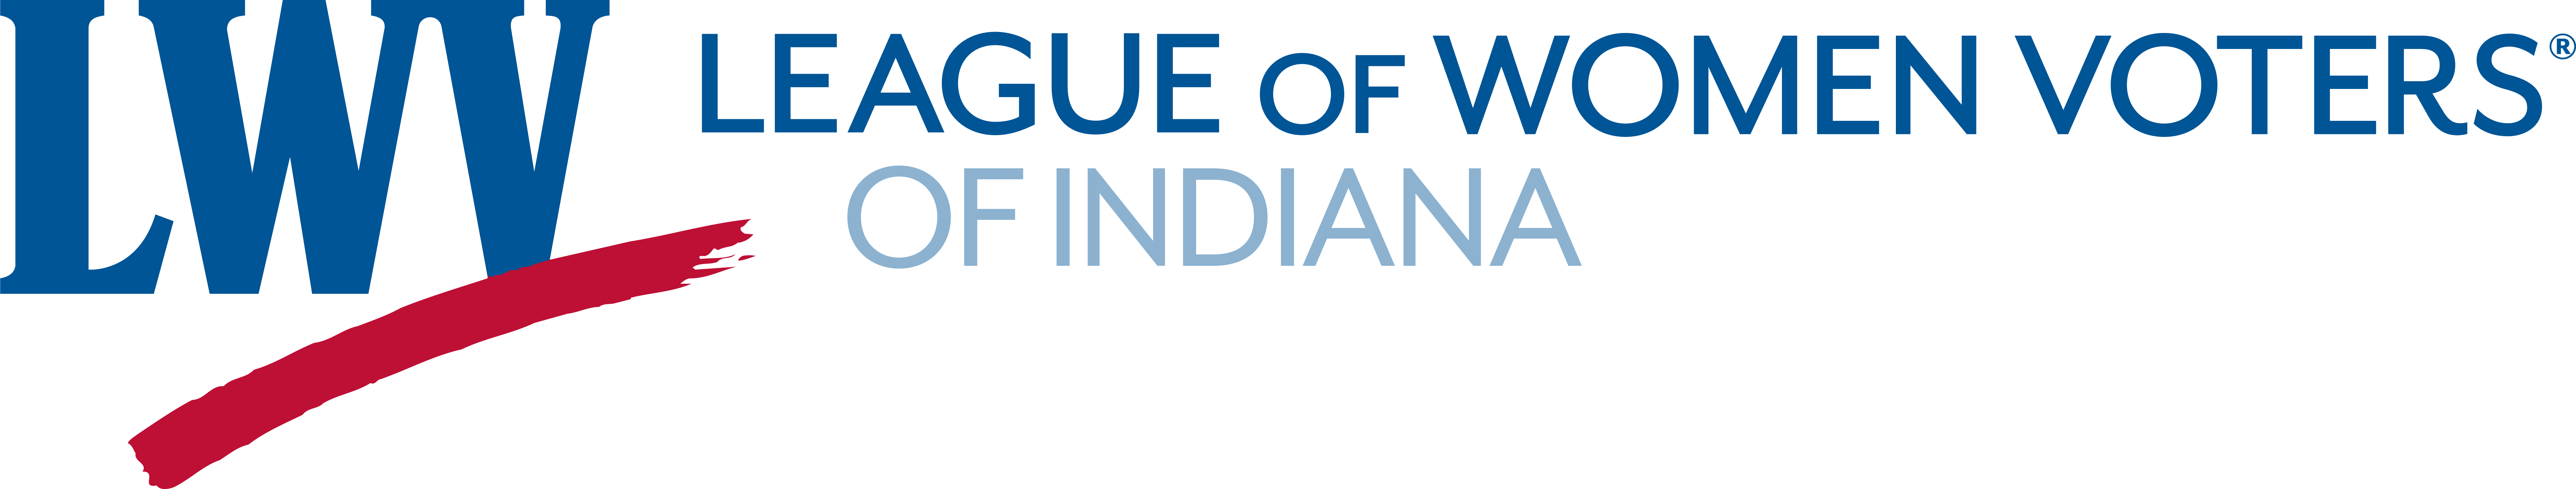 League of Women Voters of Indiana logo